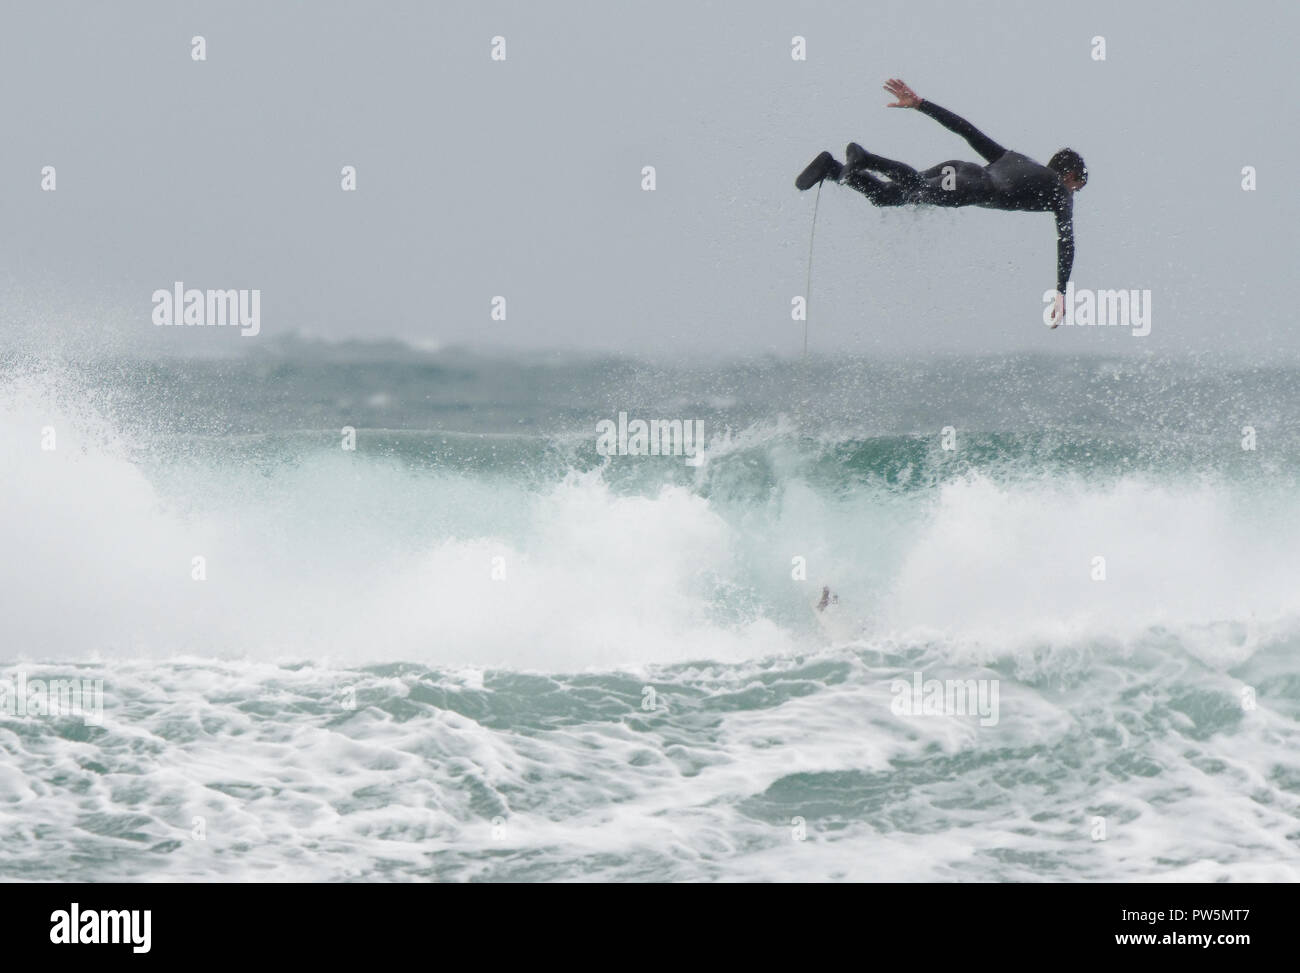 Newquay, Cornwall. 12th Oct 2018. UK Weather, British Universities and Colleges Sports organization postpone the first day of UK`s largest surf contest as to Storm Callum conditions at Fistral Beach.   Fistral Bay.12th September, 2018  Robert Taylor/Alamy Live News.  Newquay, Cornwall, UK. Credit: Robert Taylor/Alamy Live News Stock Photo